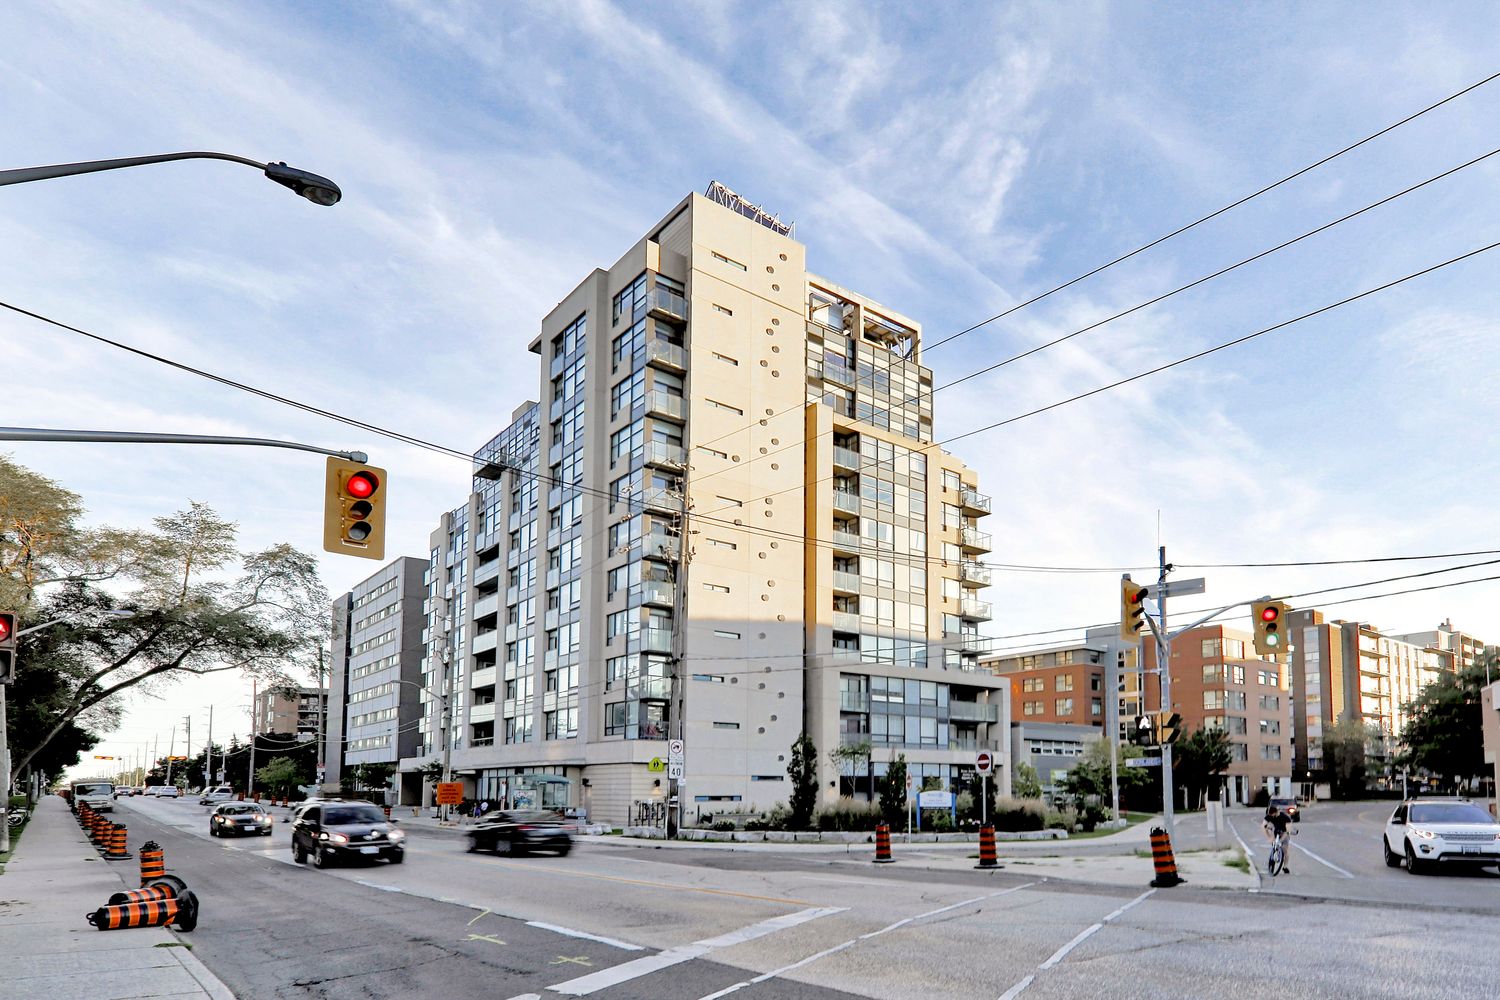 280 Donlands Avenue. The East Yorker is located in  East York, Toronto - image #1 of 4